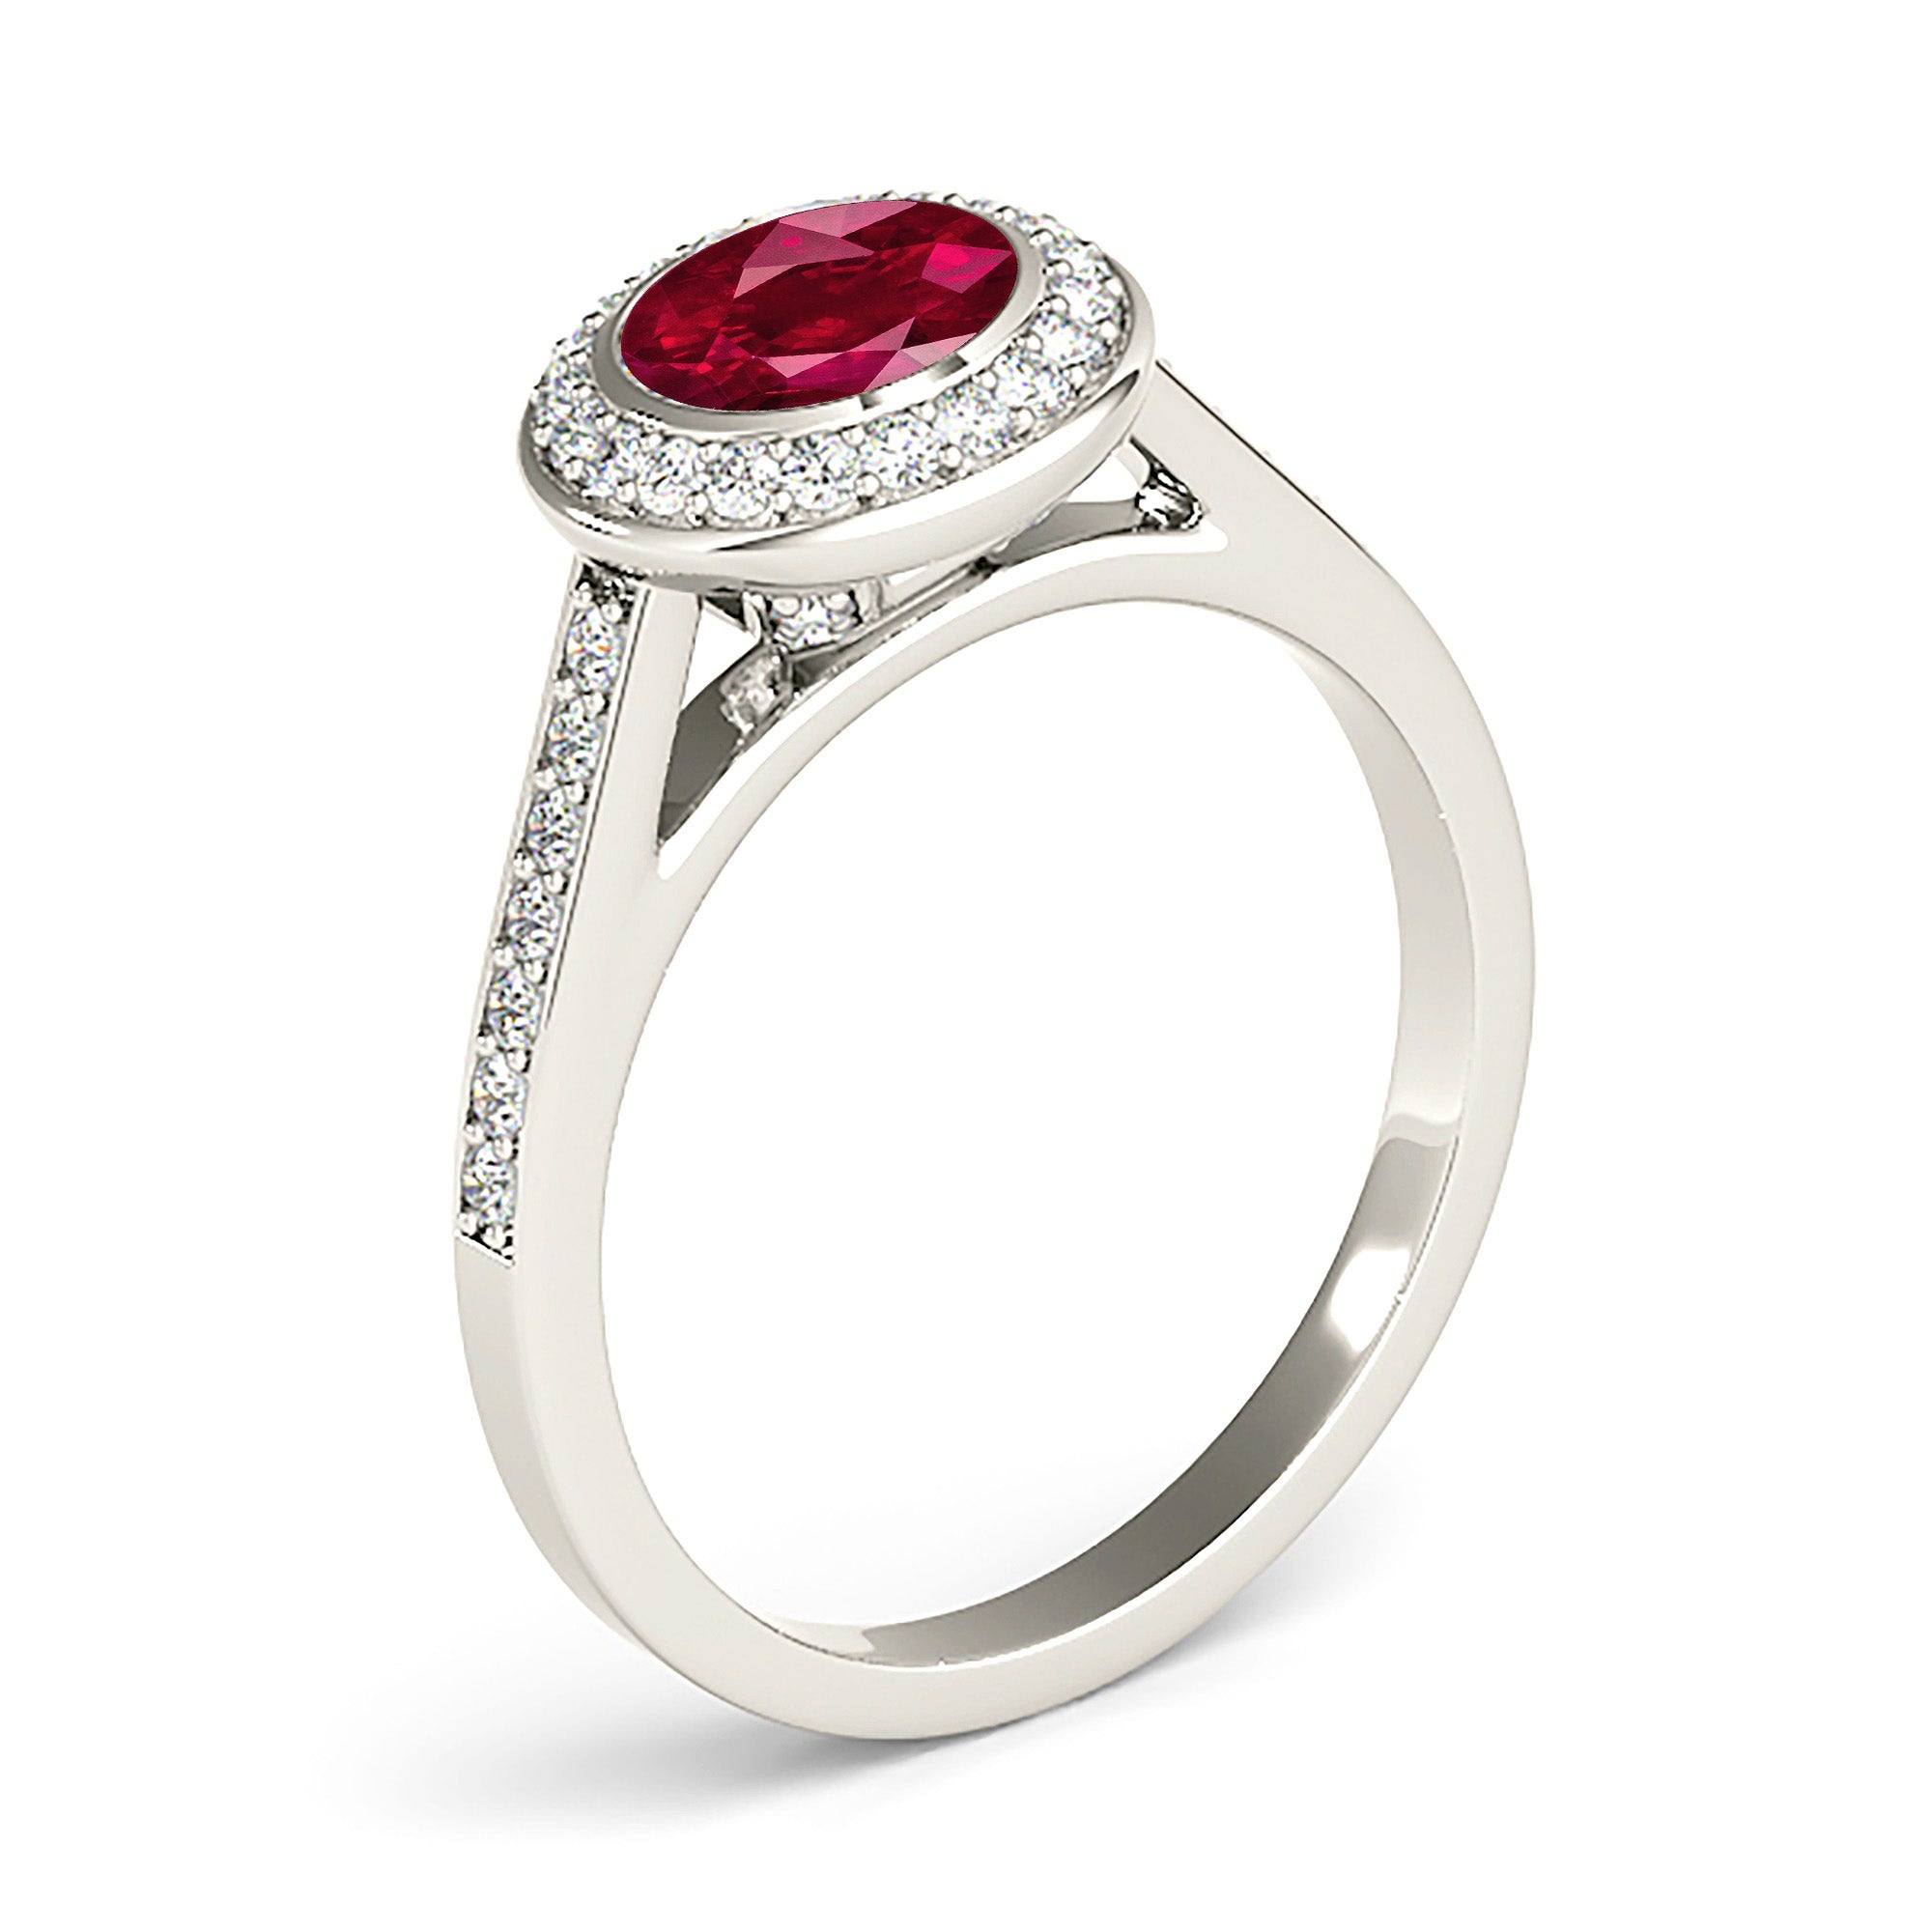 1.35 ct. Genuine Ruby Ring With 0.25 ctw. Diamond Halo, Delicate Diamond Band, Elegant Halo Ring | Round Ruby Halo Ring | Natural Ruby Ring-in 14K/18K White, Yellow, Rose Gold and Platinum - Christmas Jewelry Gift -VIRABYANI